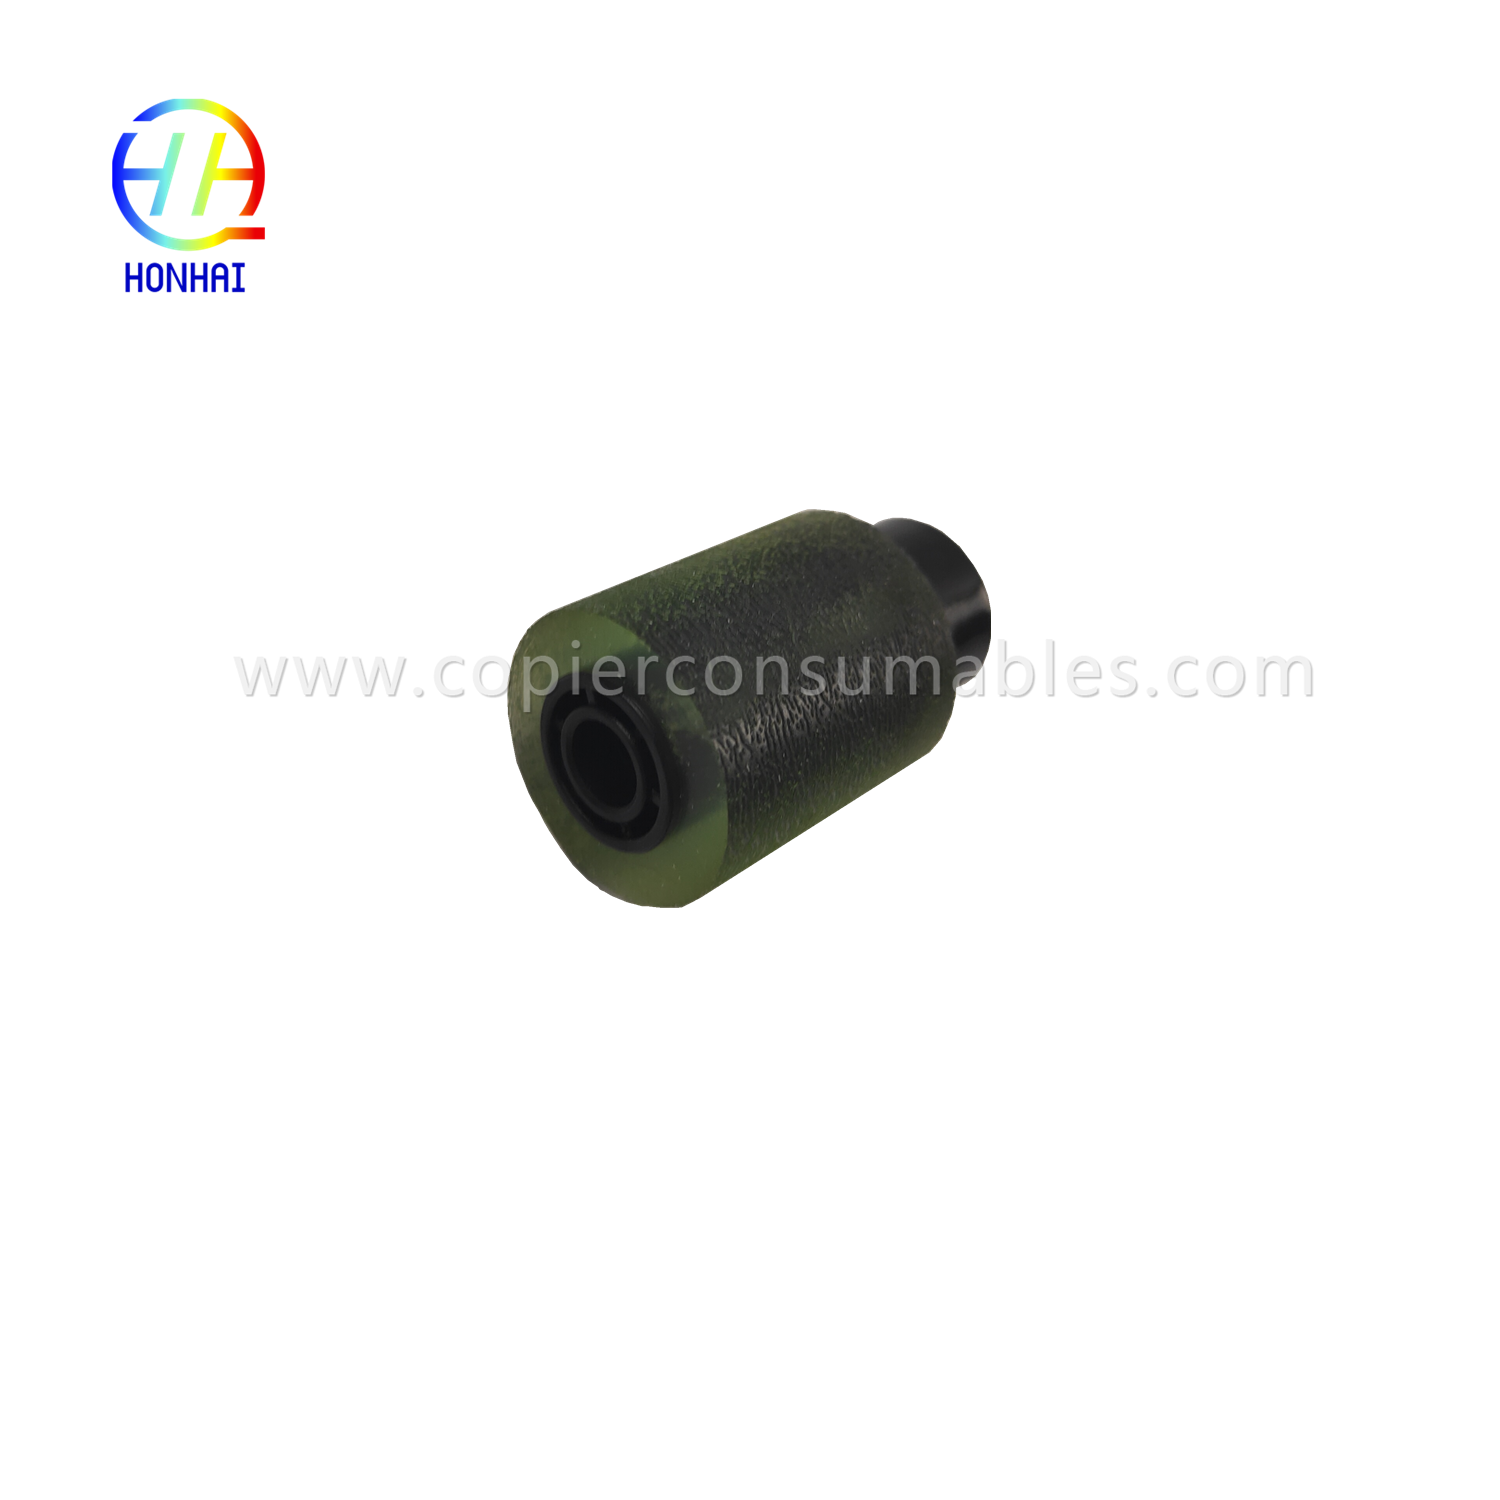 https://www.copierconsumables.com/feed-roller-for-ricoh-mpc2003-mpc2503-mpc3003-mpc3503-af031094